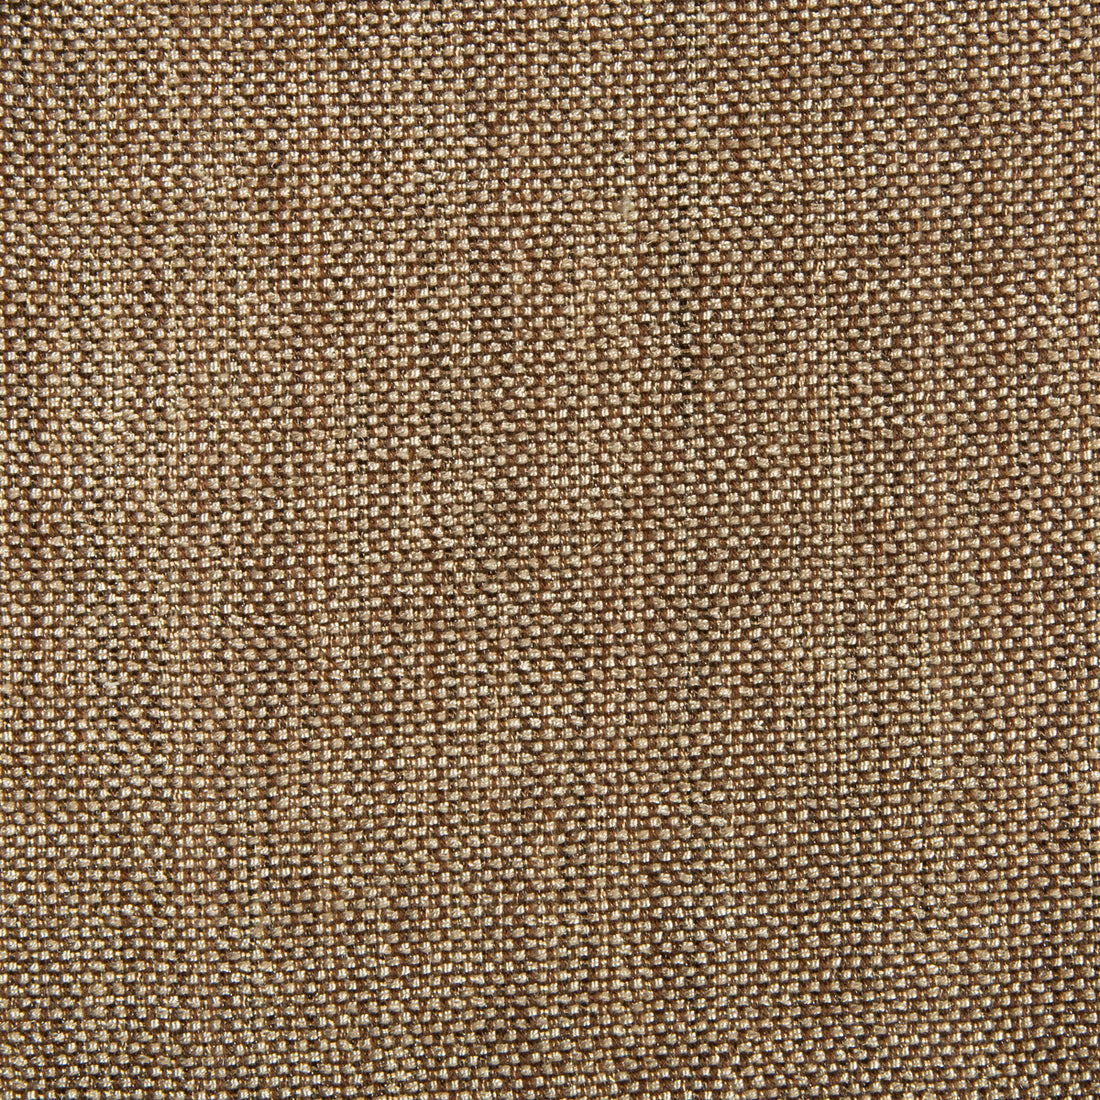 Kravet Contract fabric in 4458-606 color - pattern 4458.606.0 - by Kravet Contract